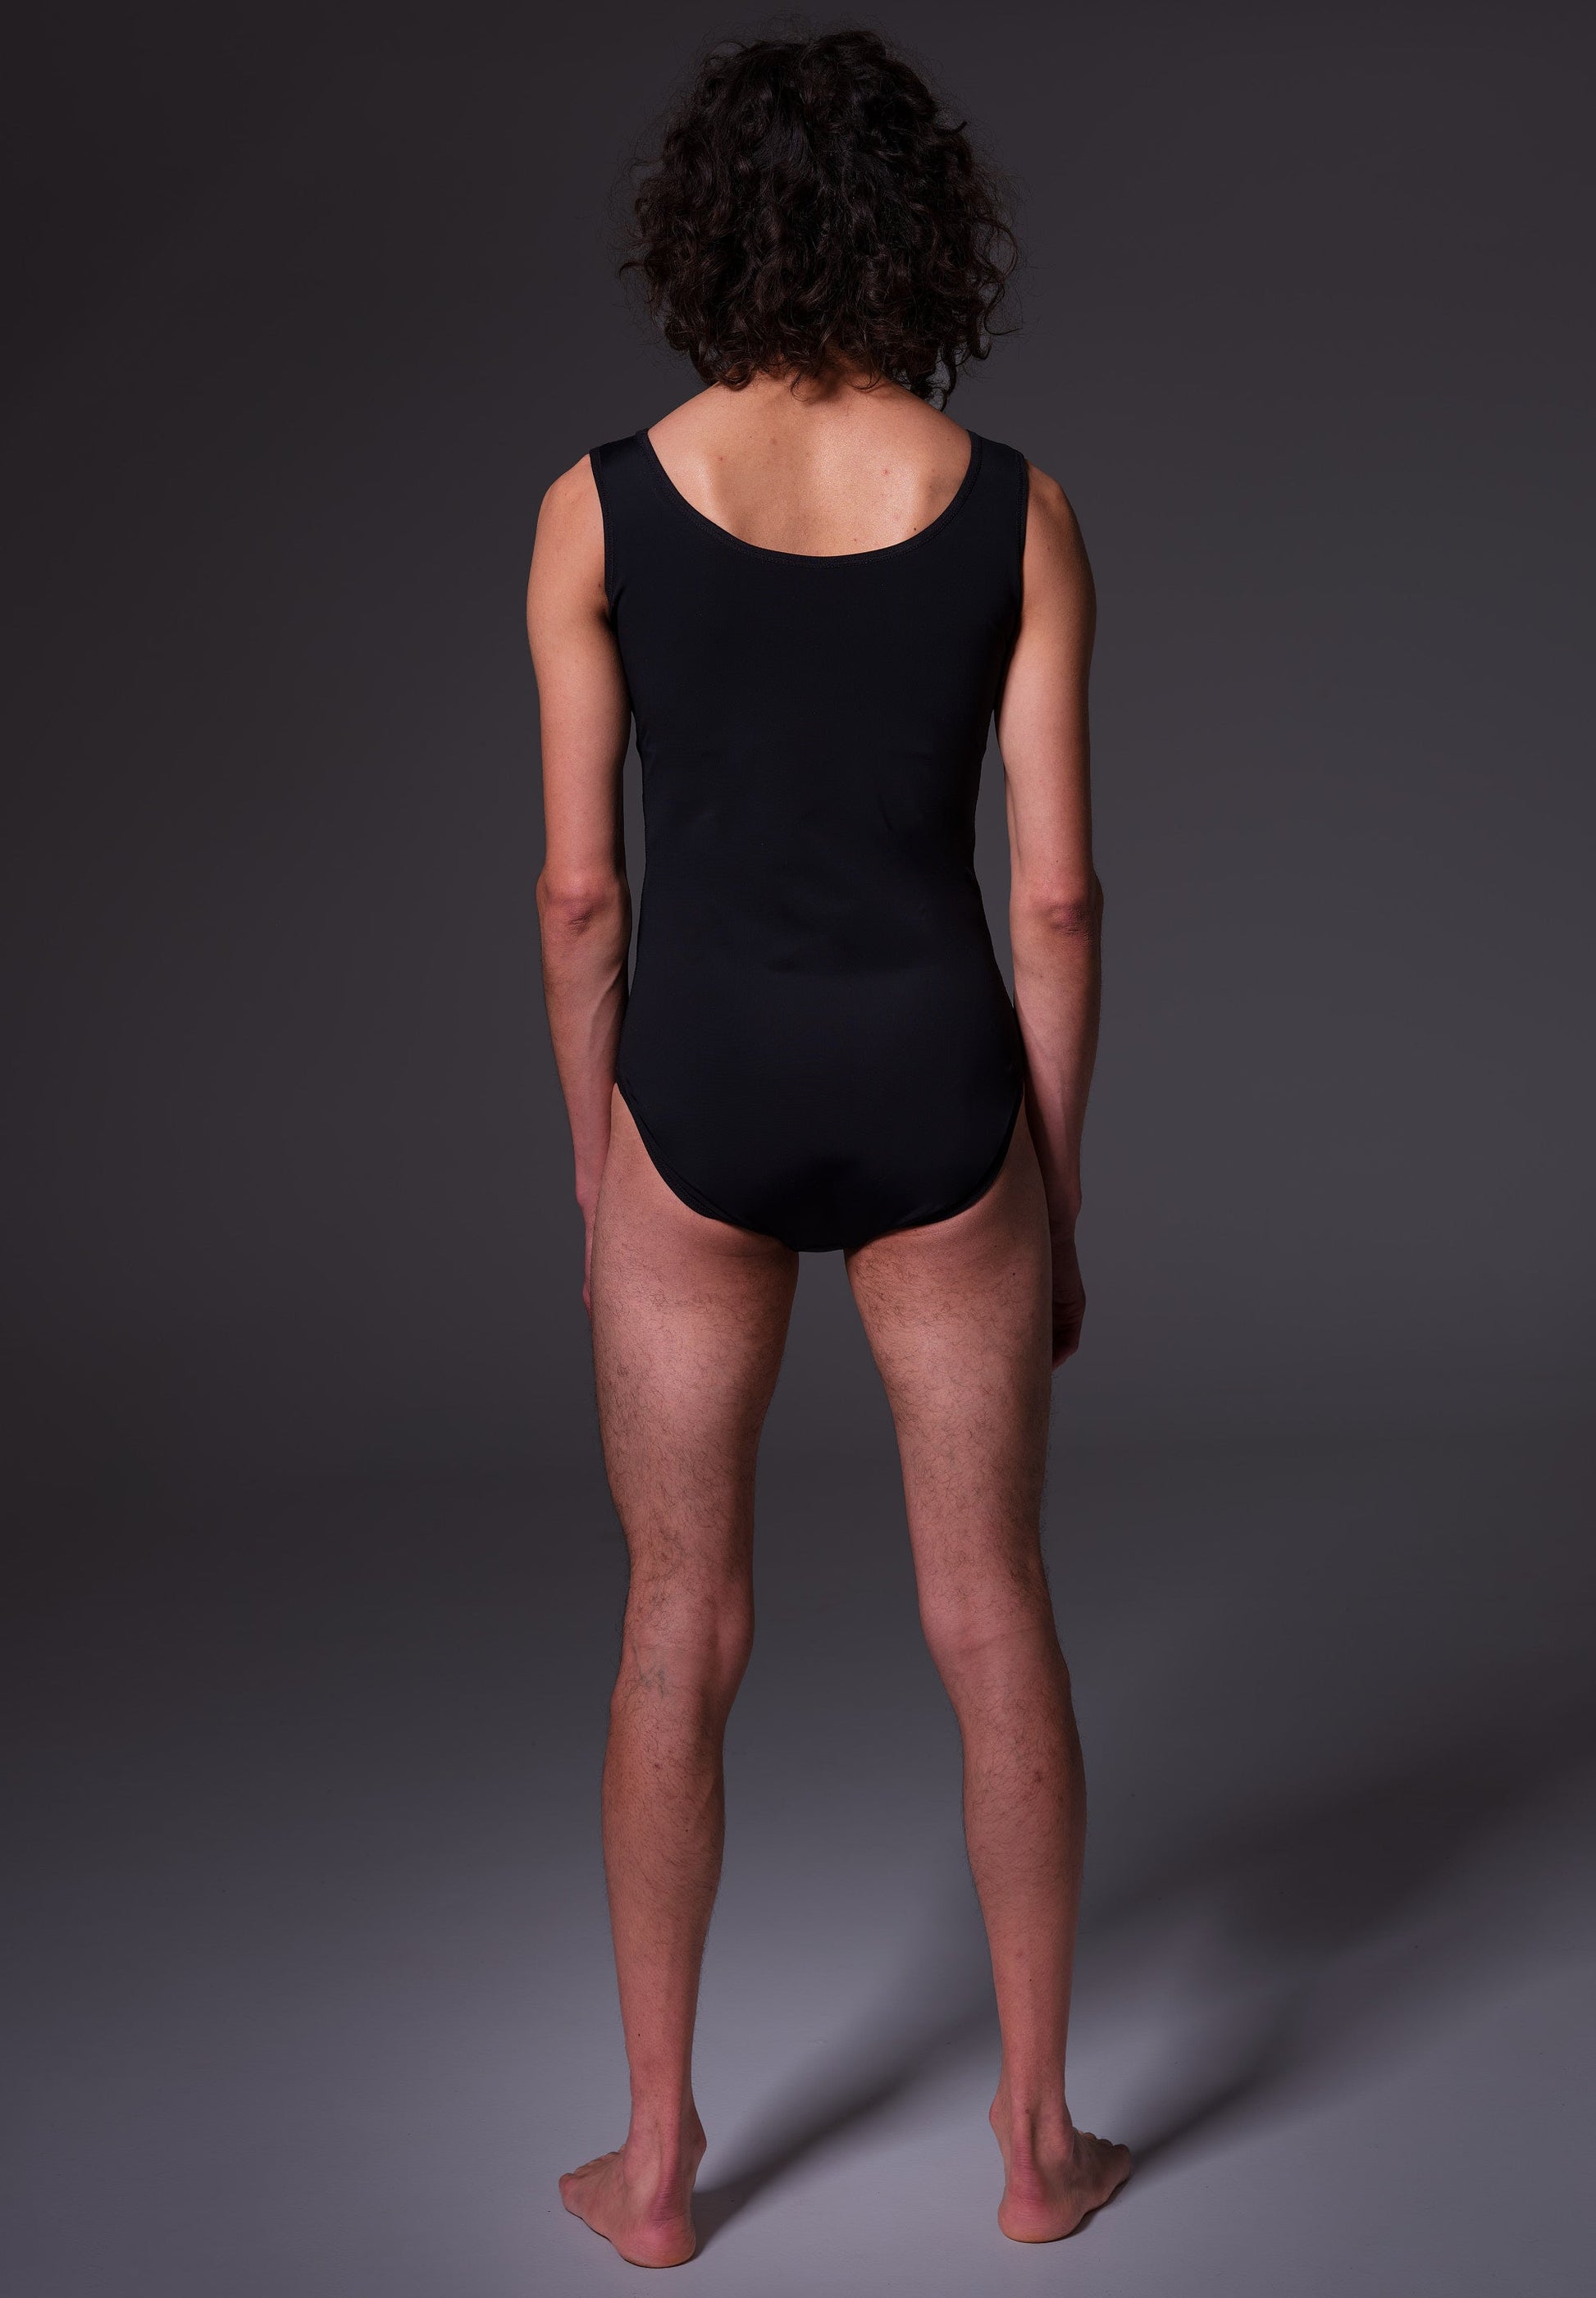 Swimsuit black, seen from the back on model Riah